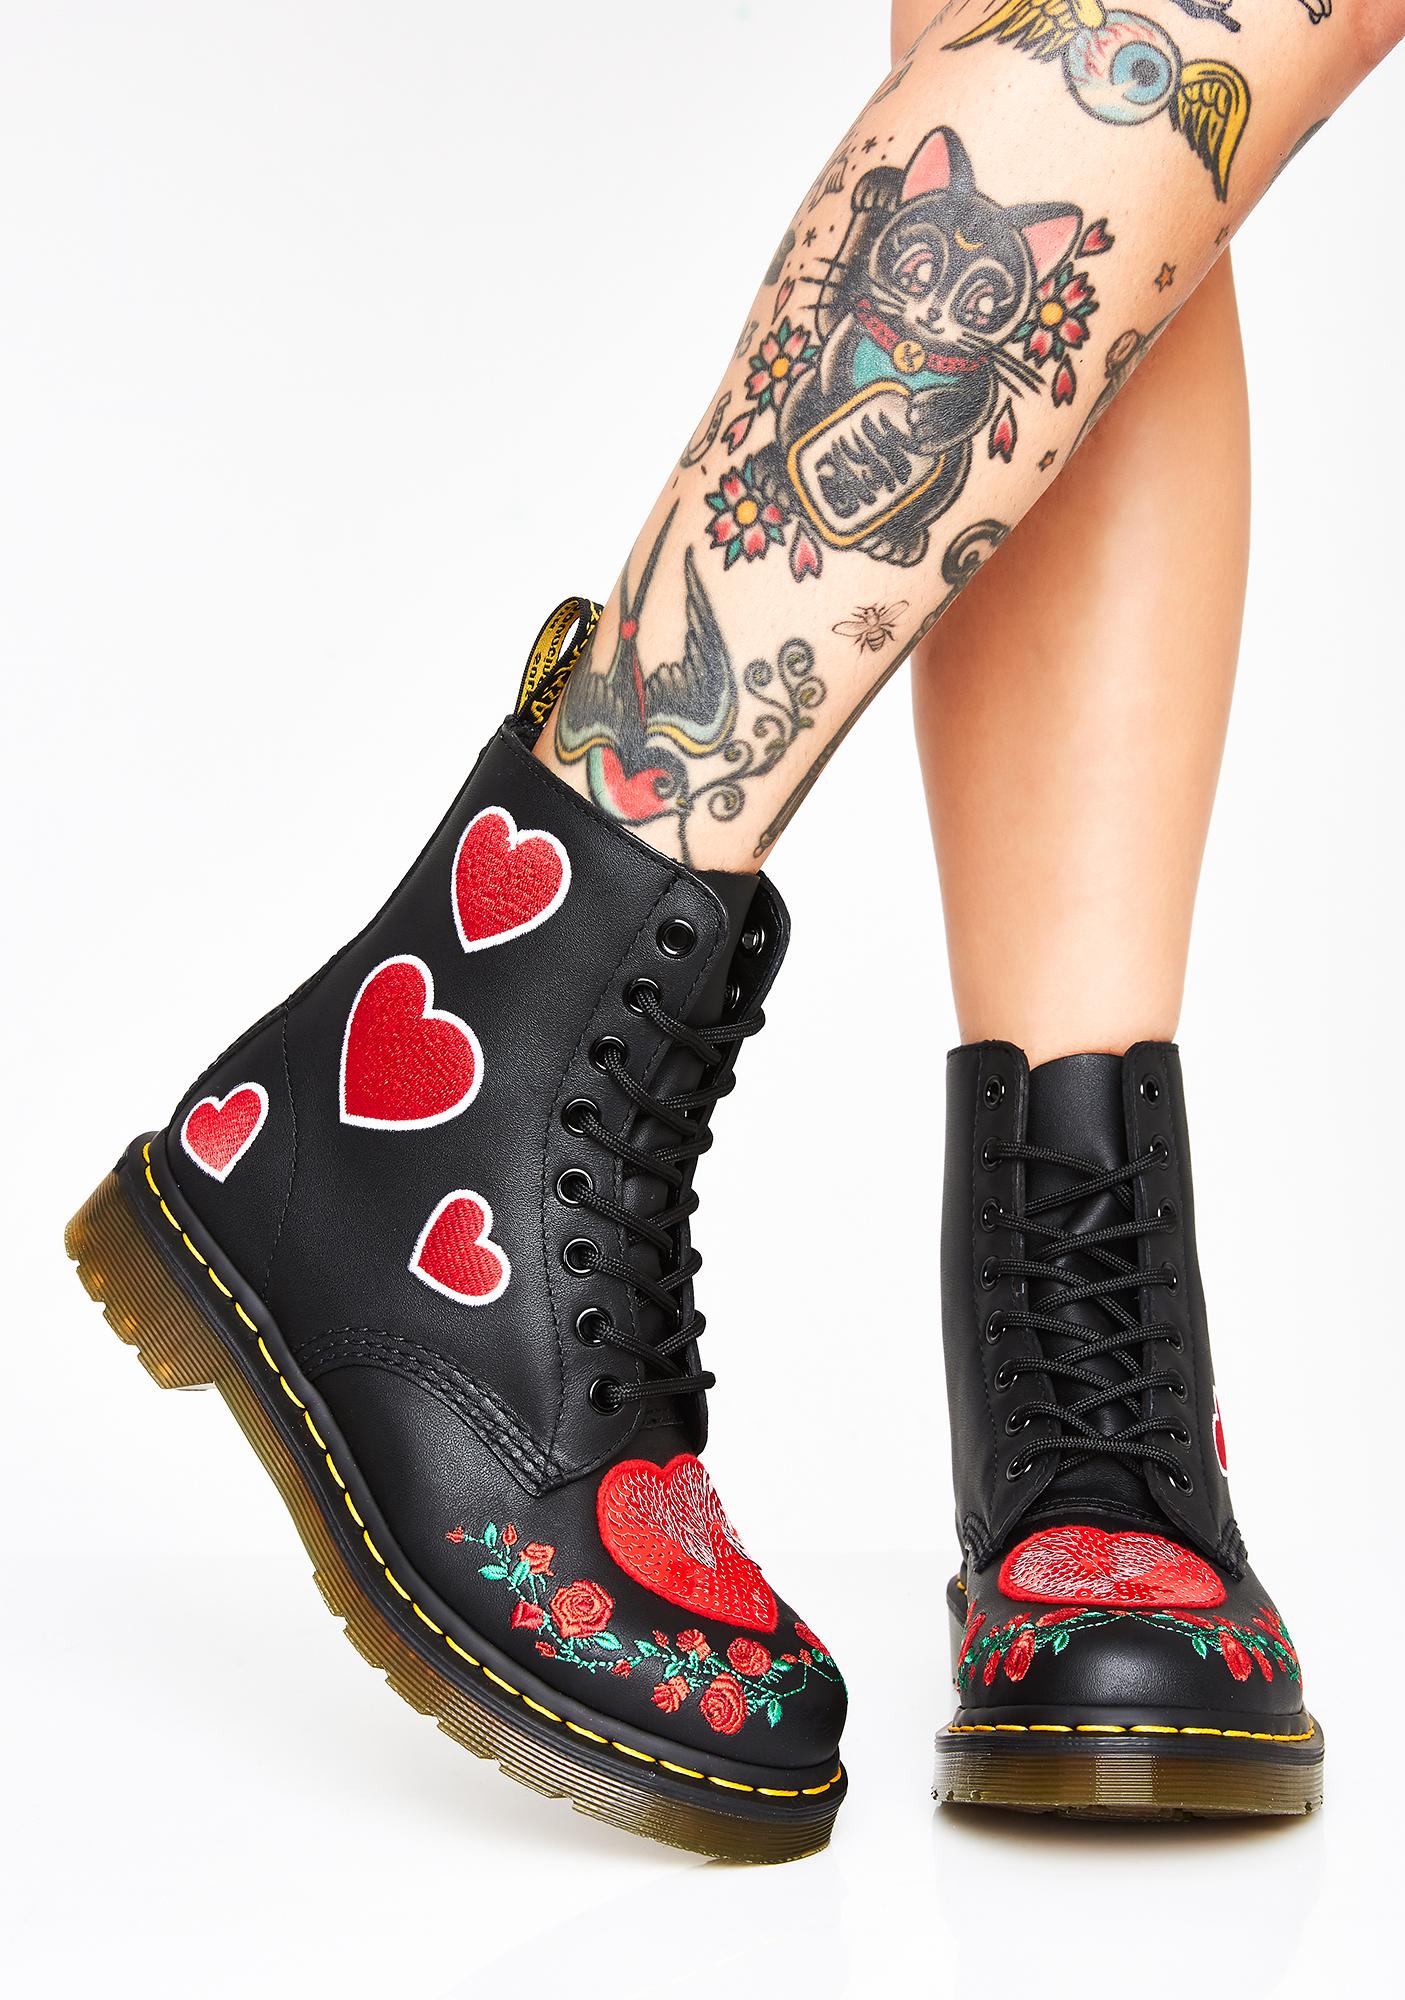 dr martens skull and roses boots